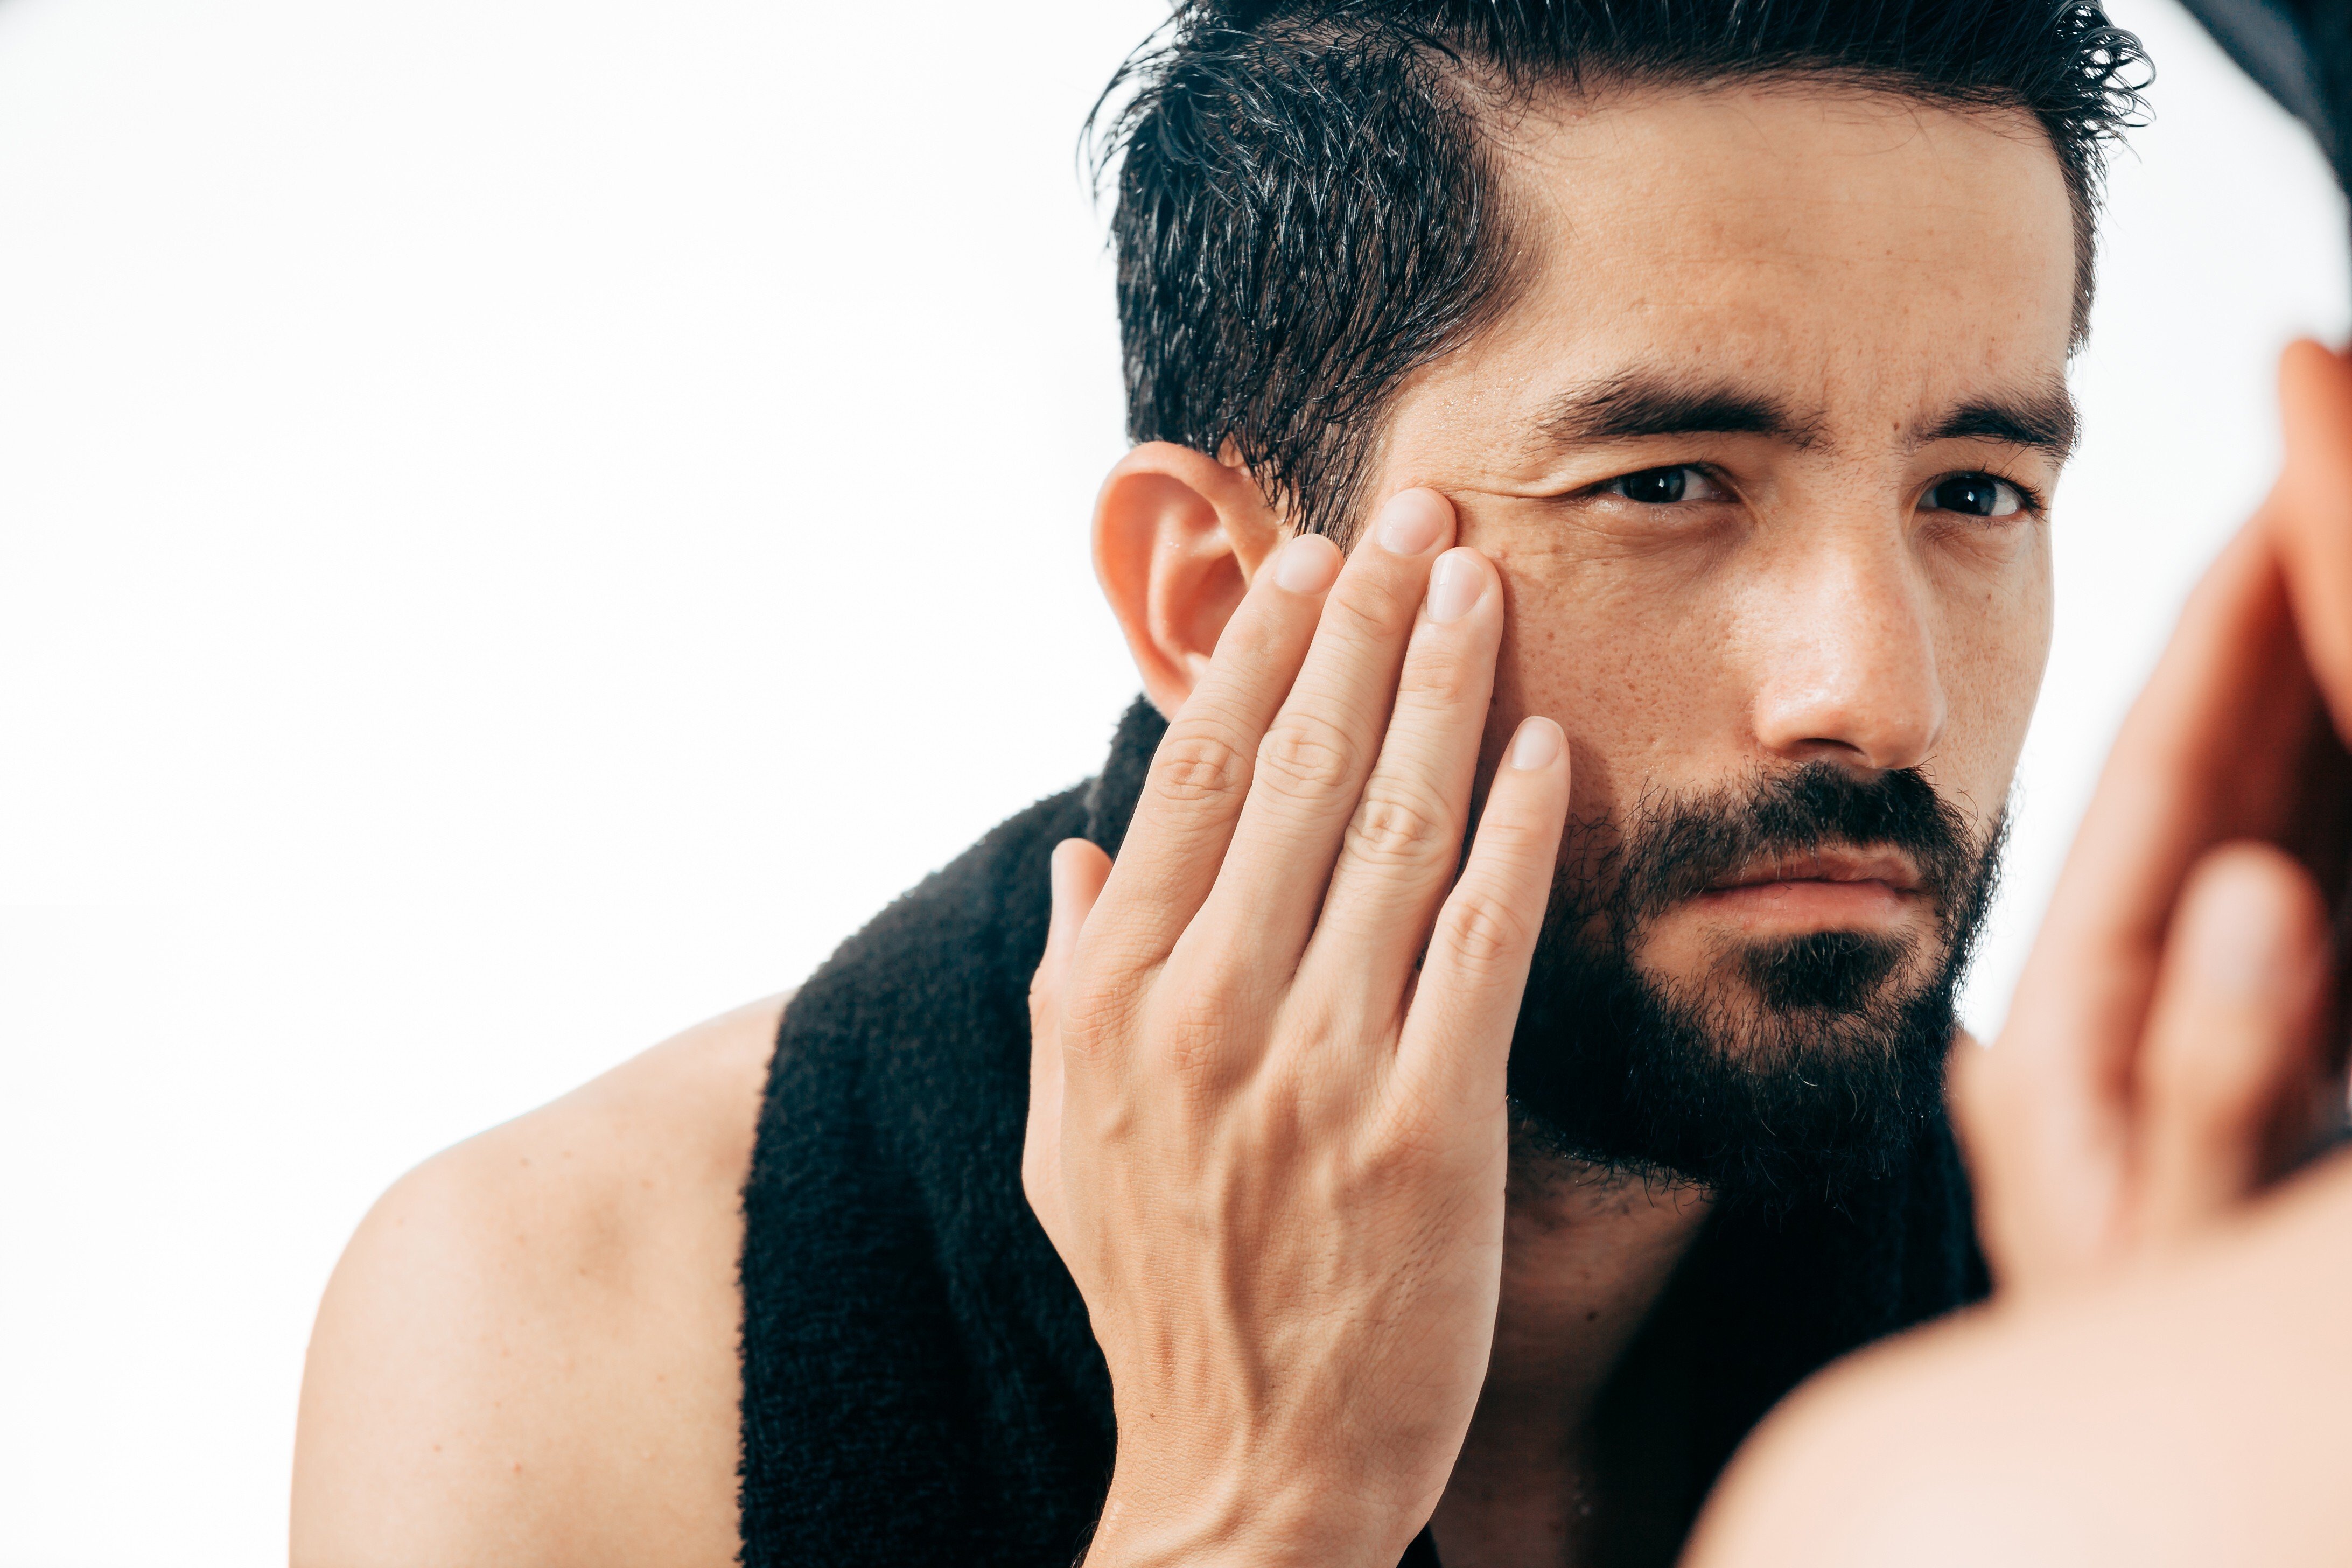 Men’s skincare and grooming products are emerging as a growth sector in the beauty care market. Photo: Getty Images